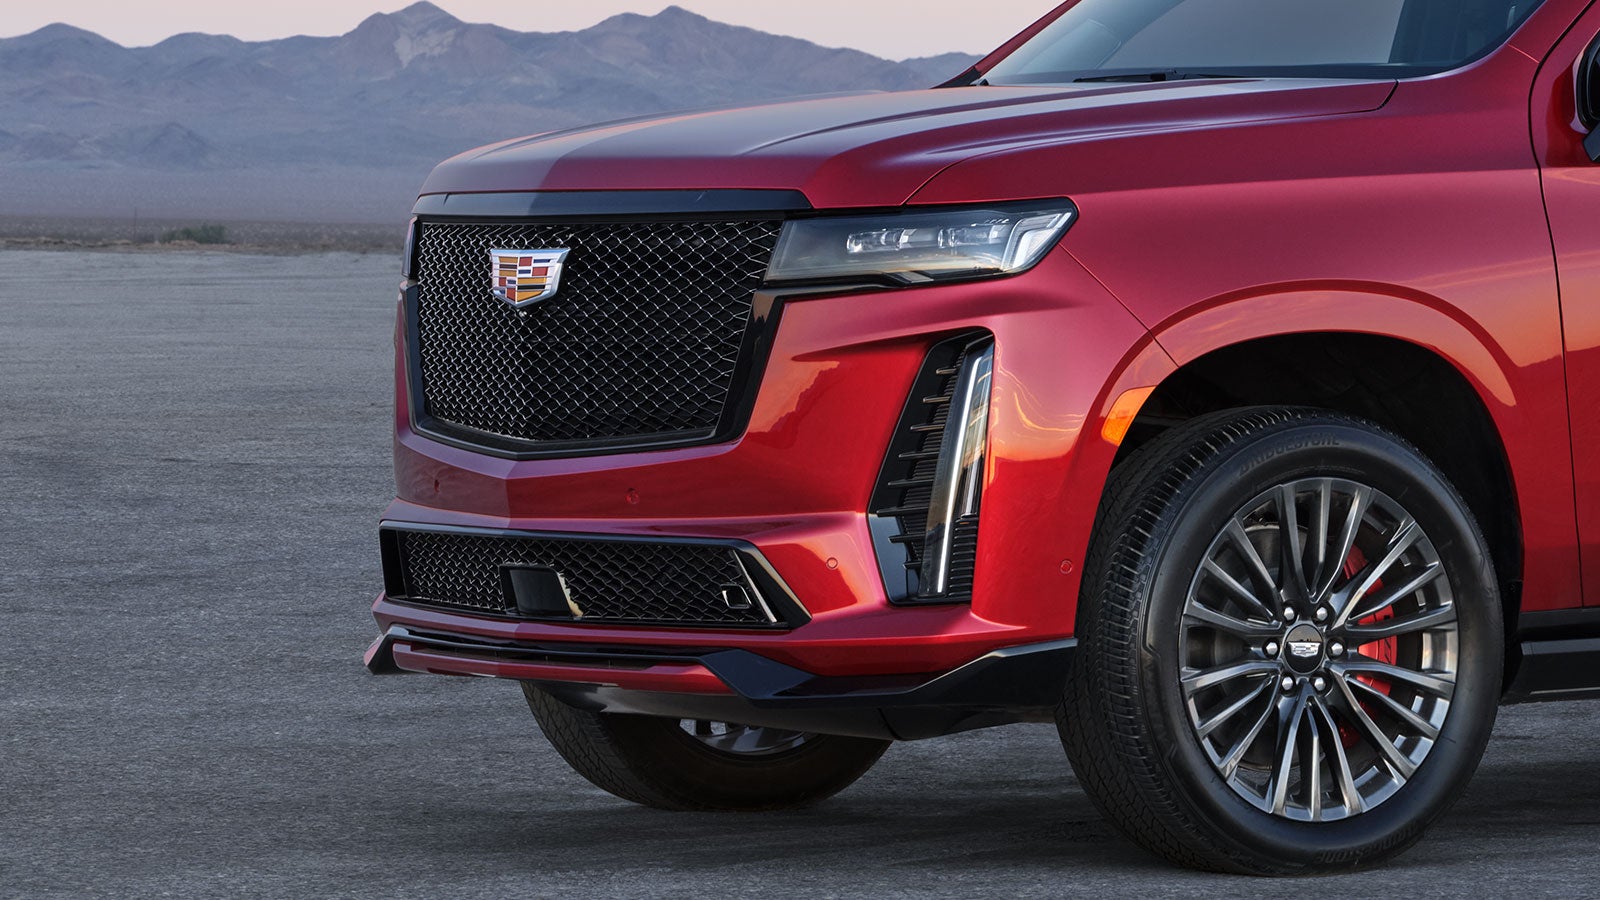 What's Covered Under an Extended Warranty on a New Cadillac?